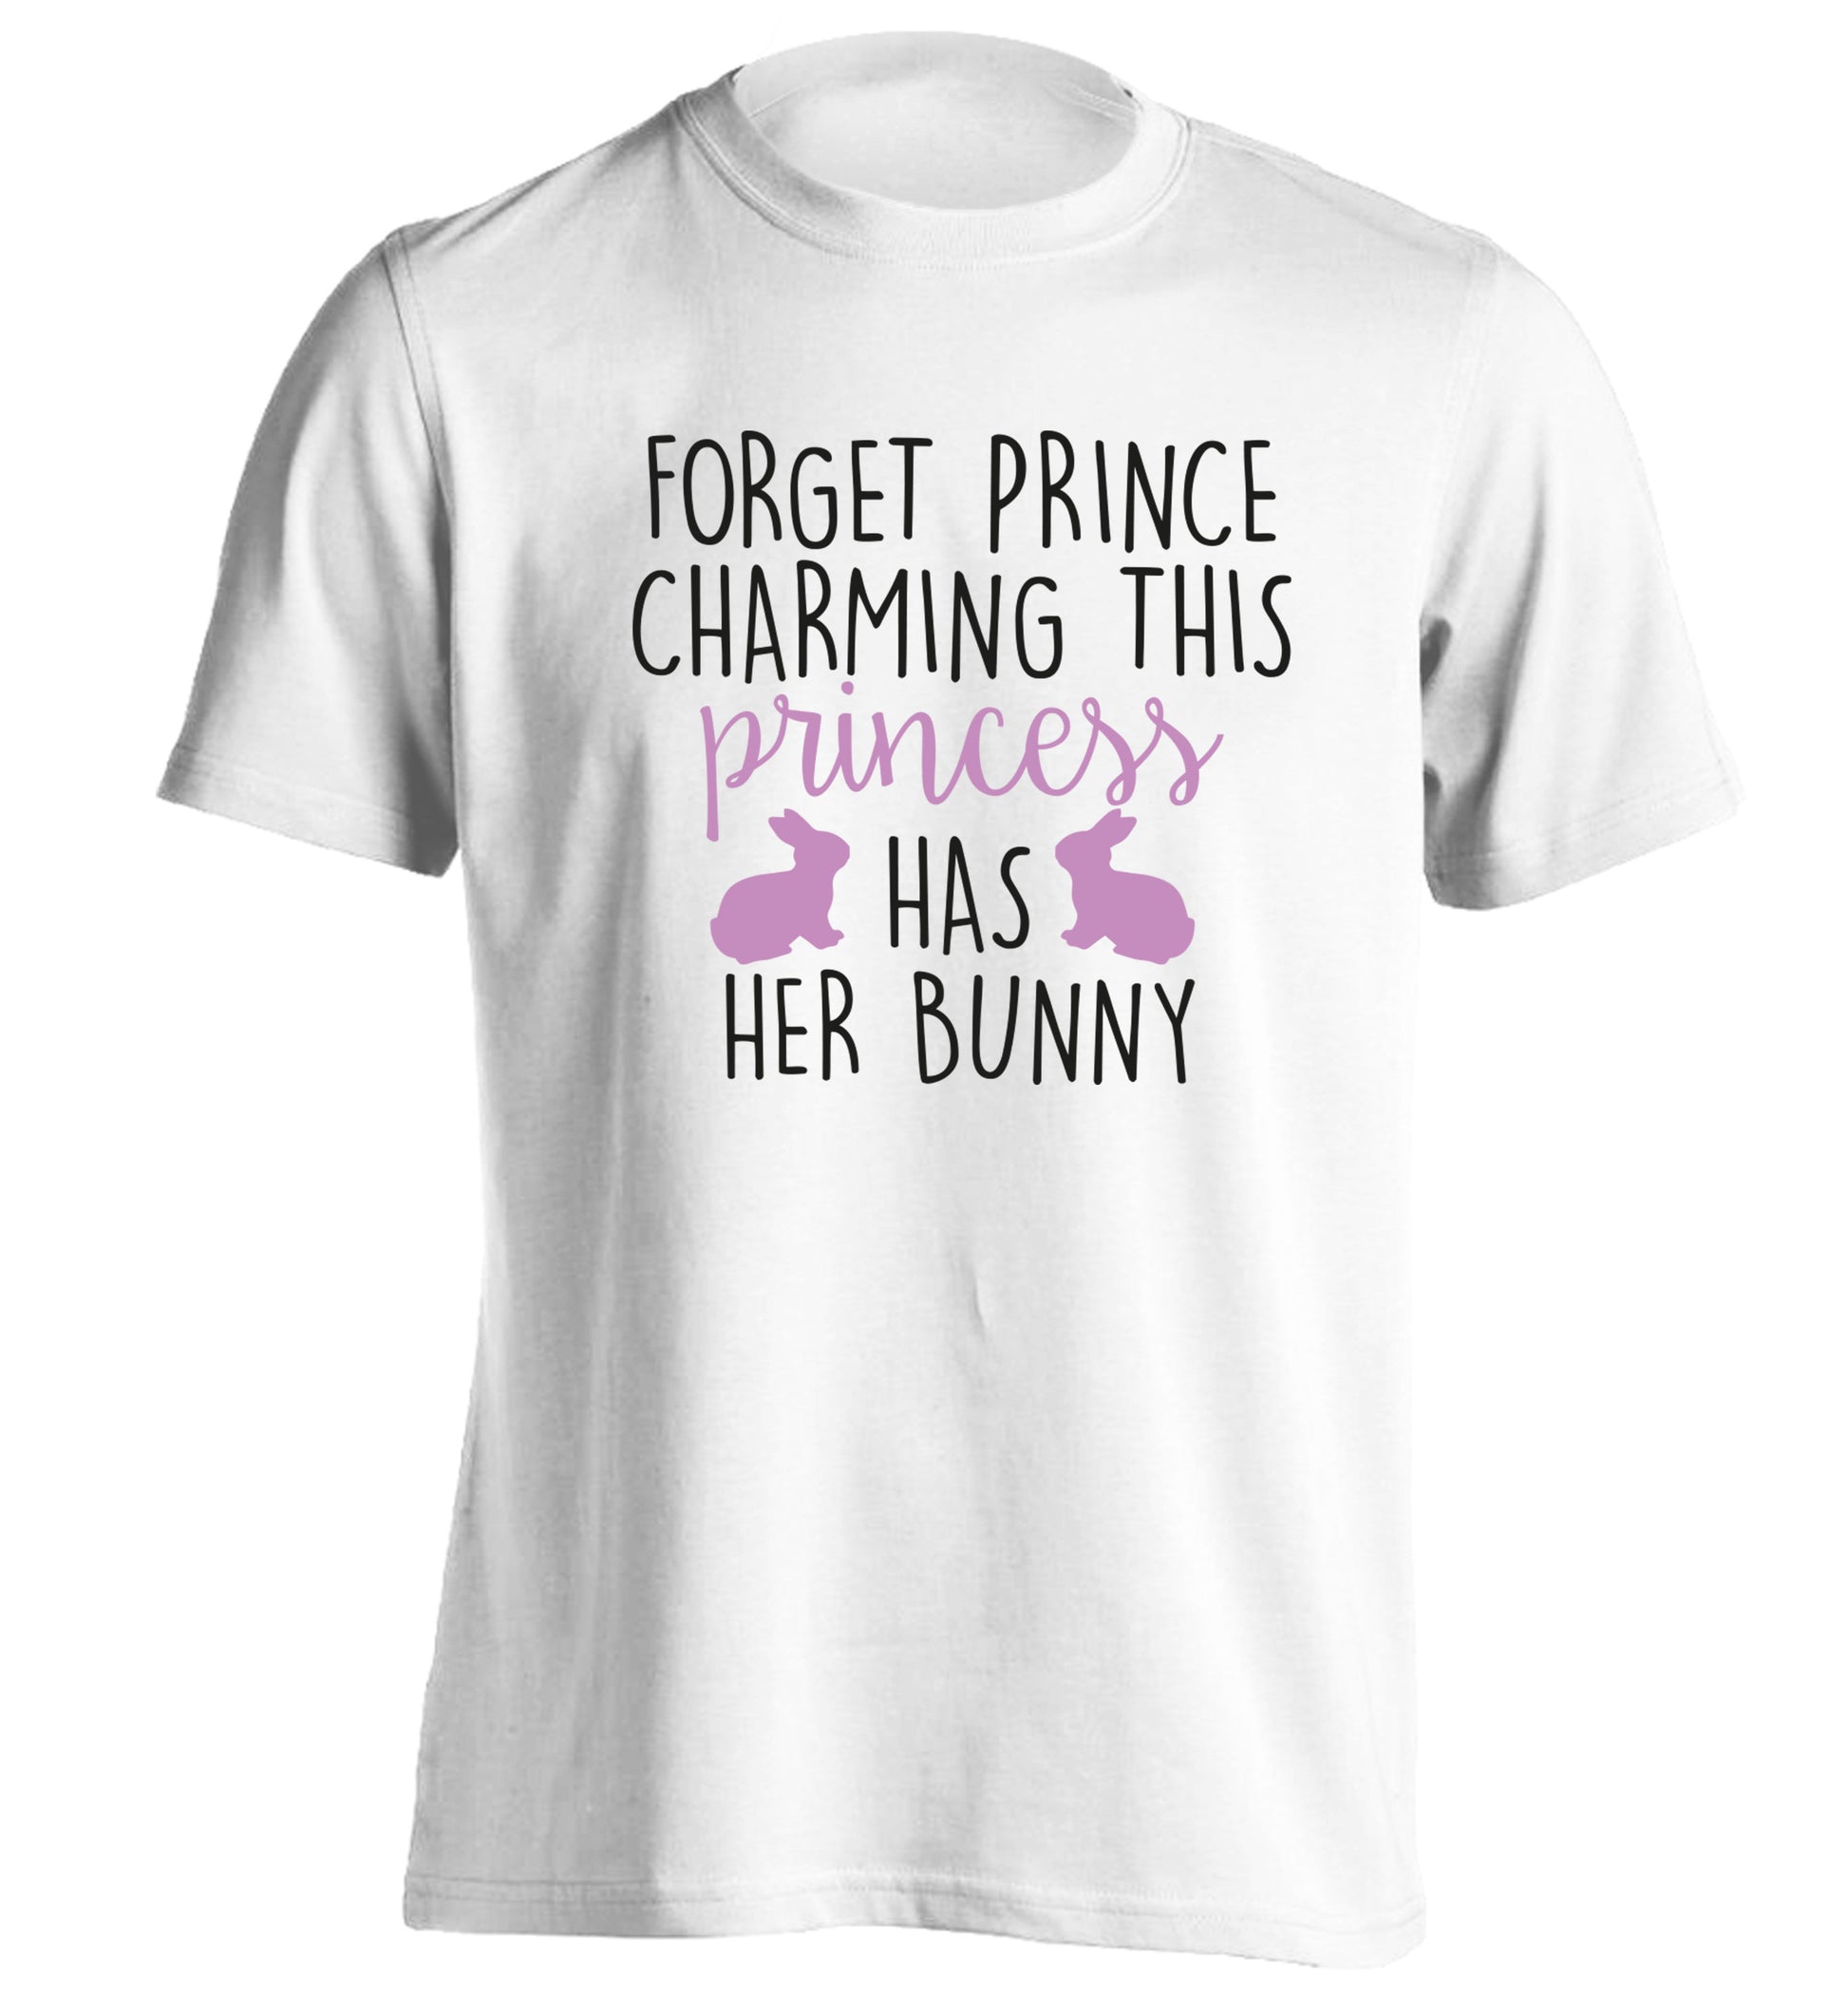 Forget prince charming this princess has her bunny adults unisex white Tshirt 2XL